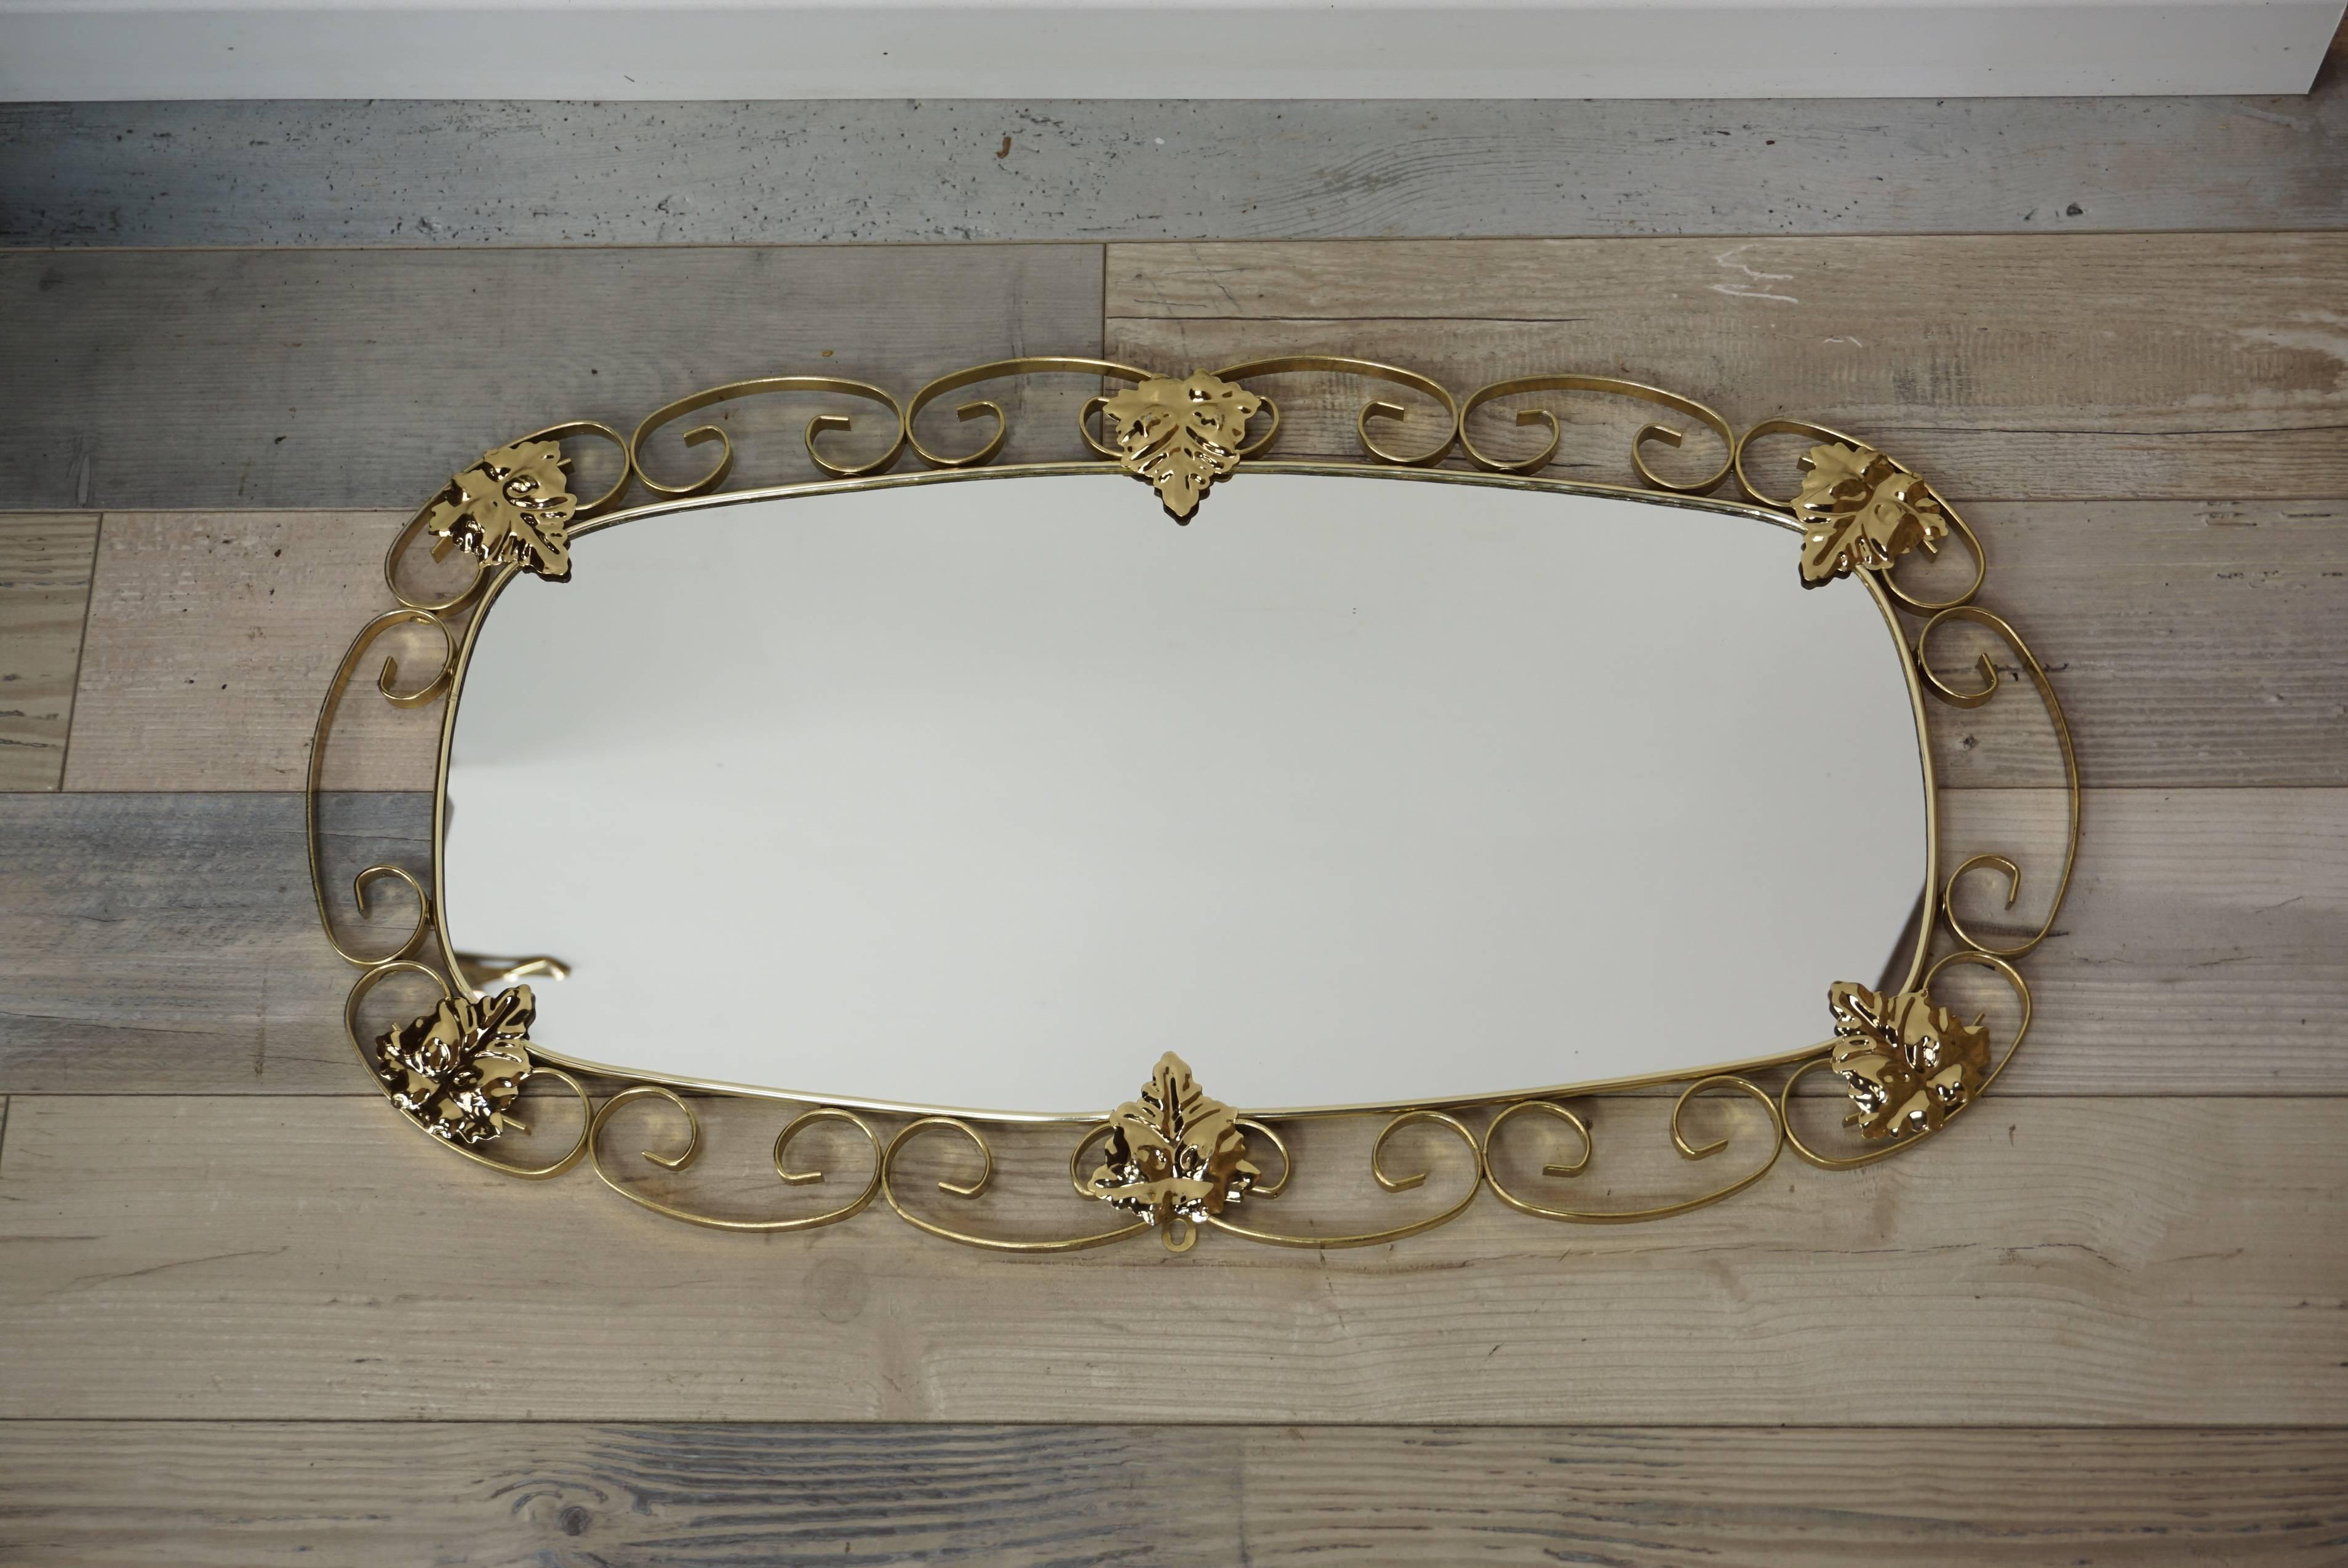 Brilliant and sparkling 1950s-1960s mirror; brass structure with delicate and fine work of scrolls and foliage, all in excellent condition.